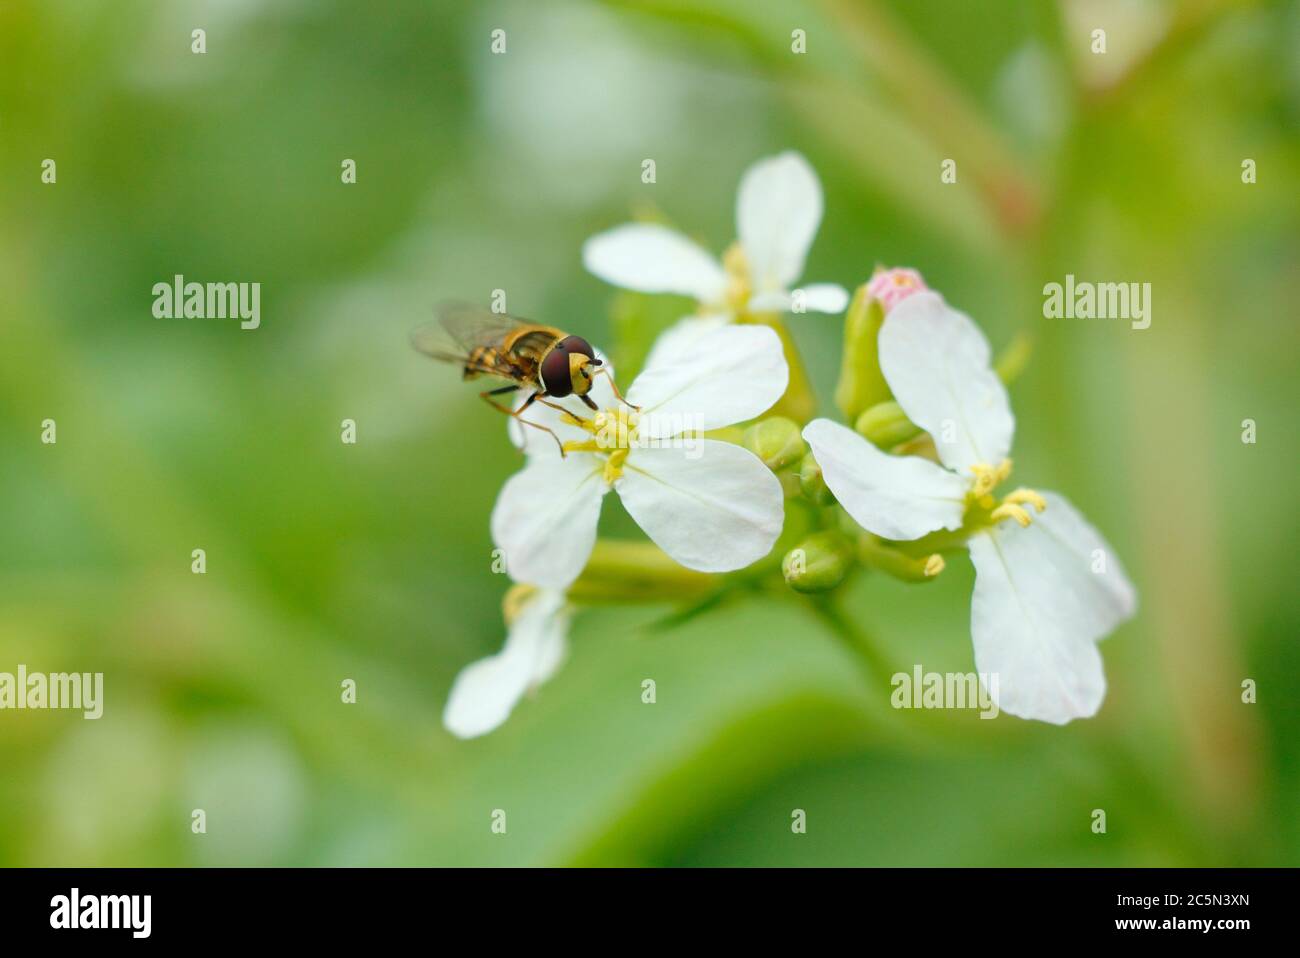 Hoverfly feeding on the flower pollen of a bolted radish plant in an English garden.  Syrphus ribesi on Raphanus sativus. Stock Photo